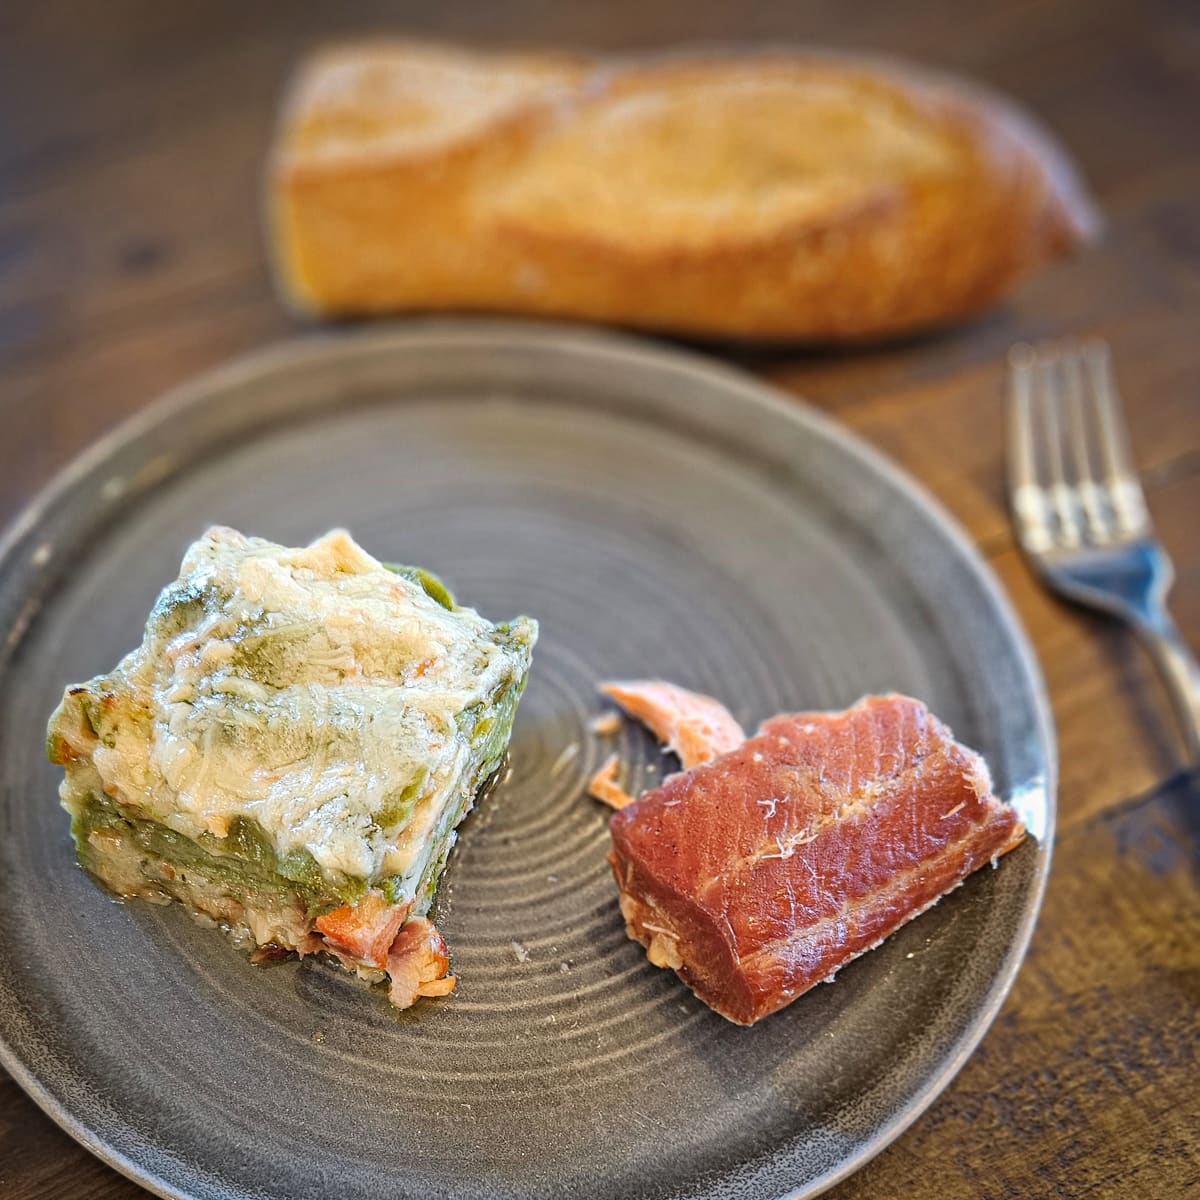 Smoked Salmon lasagna with spinach noodles.